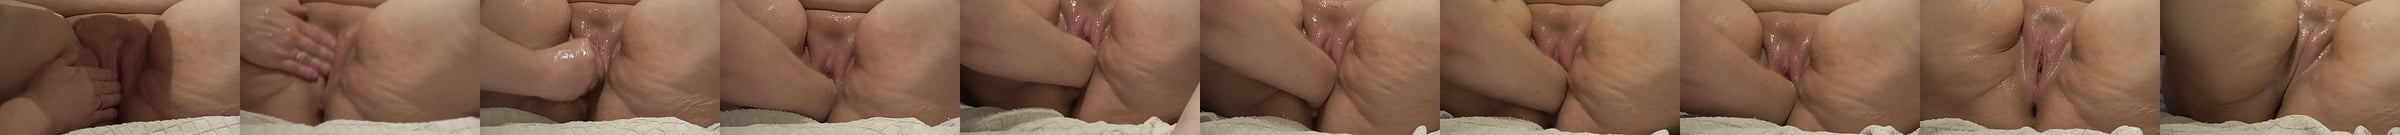 Featured Fisting Orgasm Porn Videos 4 Xhamster